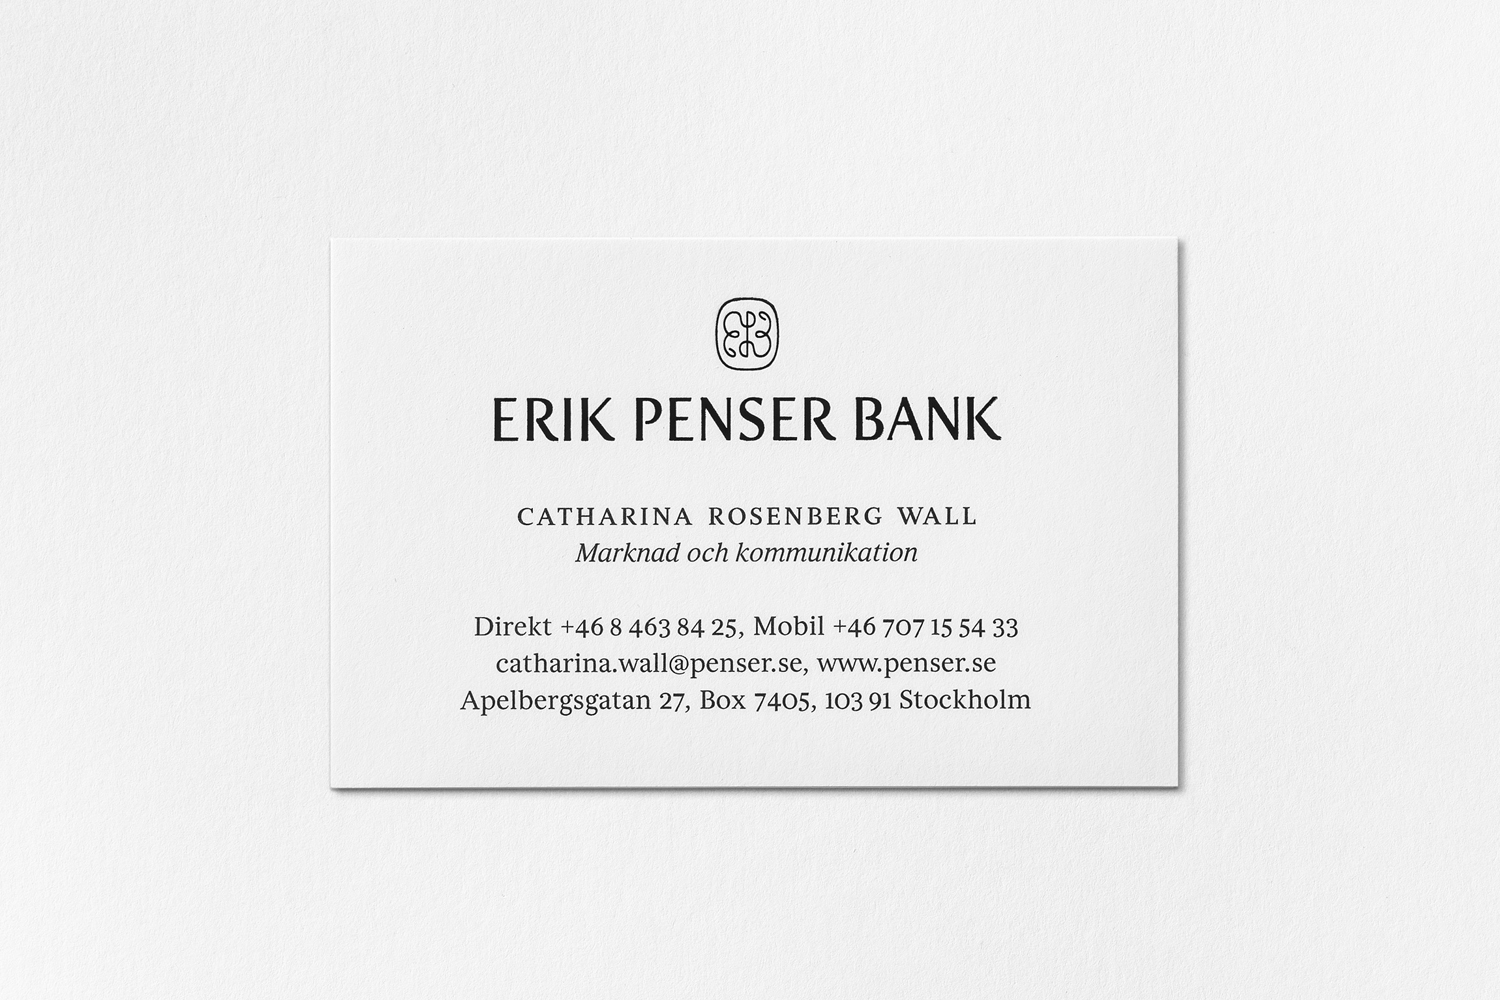 Brand identity and business card for Sweden's leading private banking firm Erik Penser Bank designed by Bedow, Stockholm